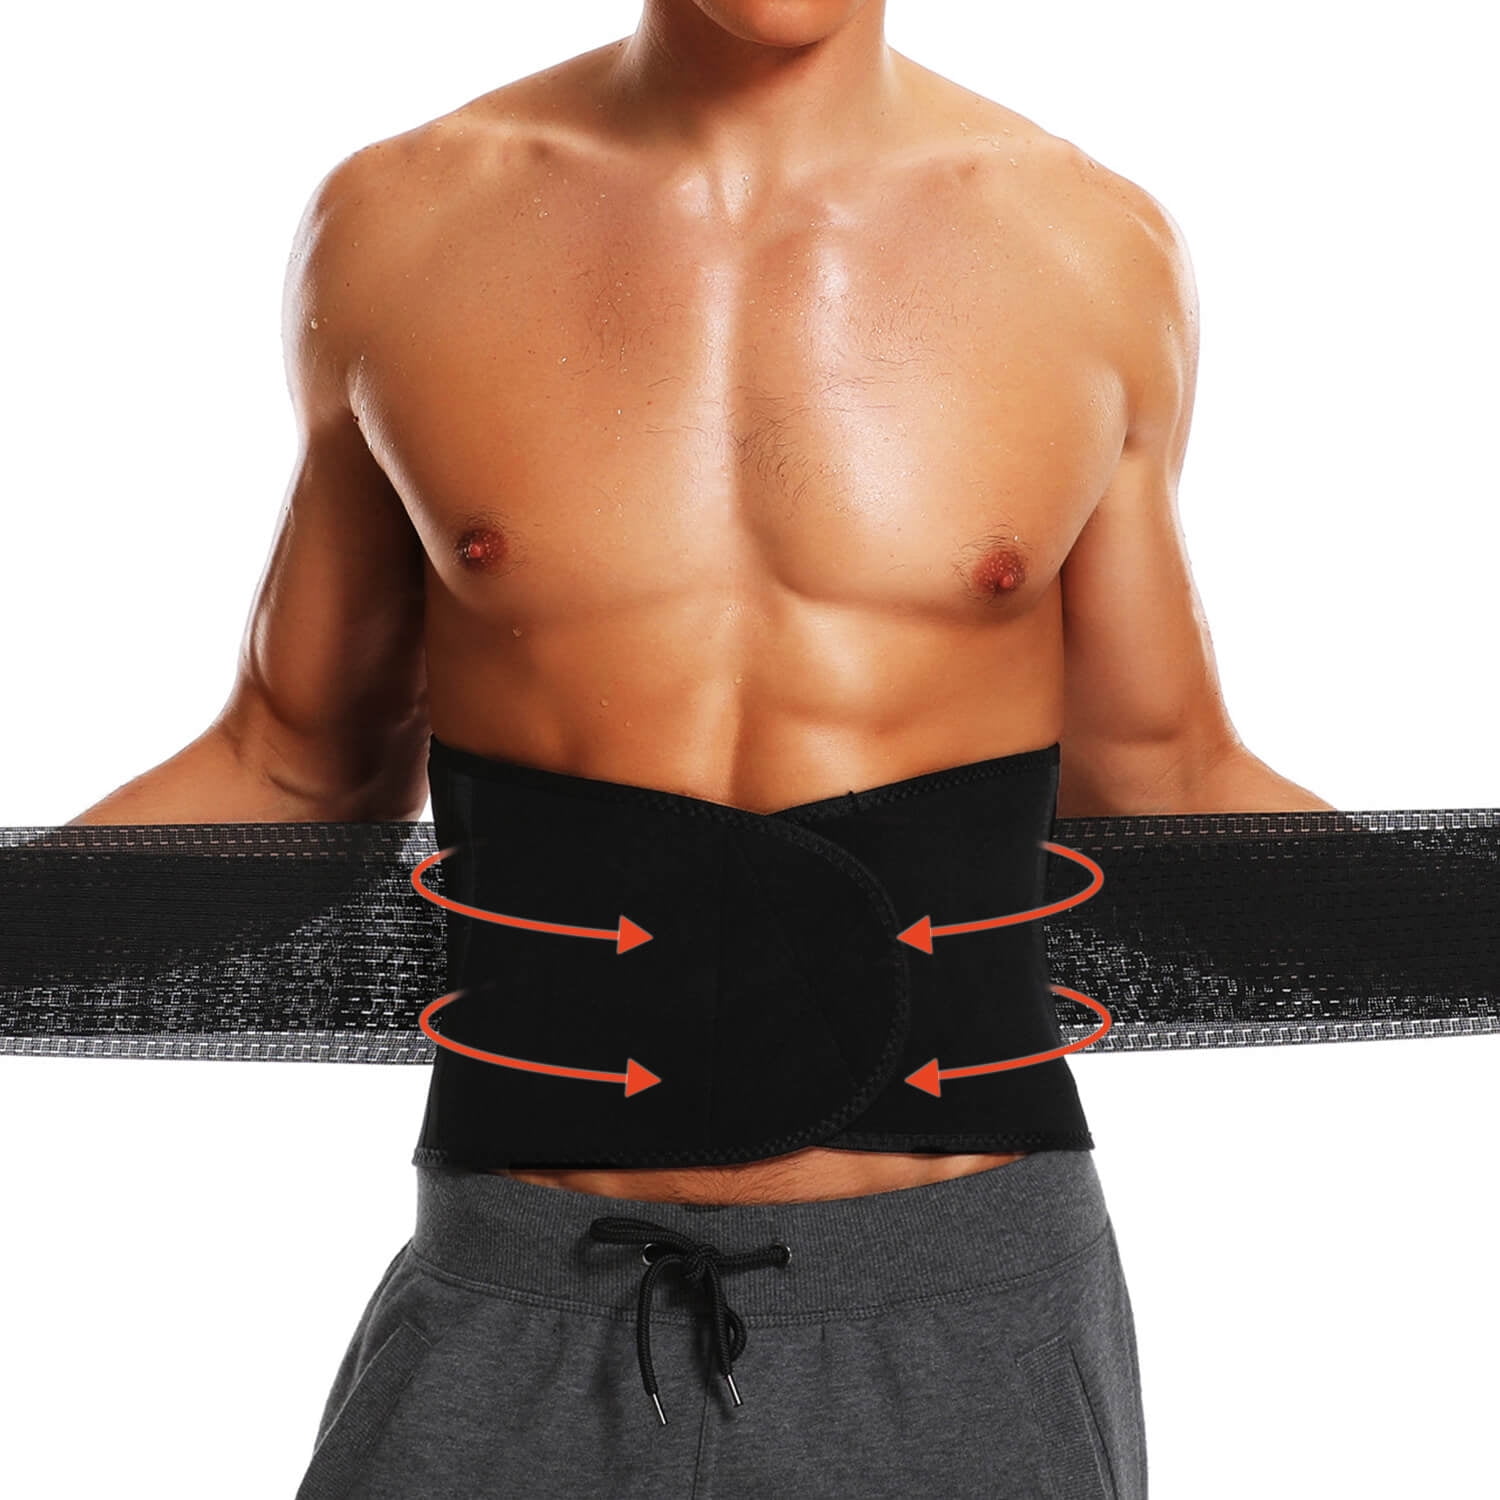 Used for Weight Loss and Perspiration Back Lumbar Support Mens and Womens Belt Trainer